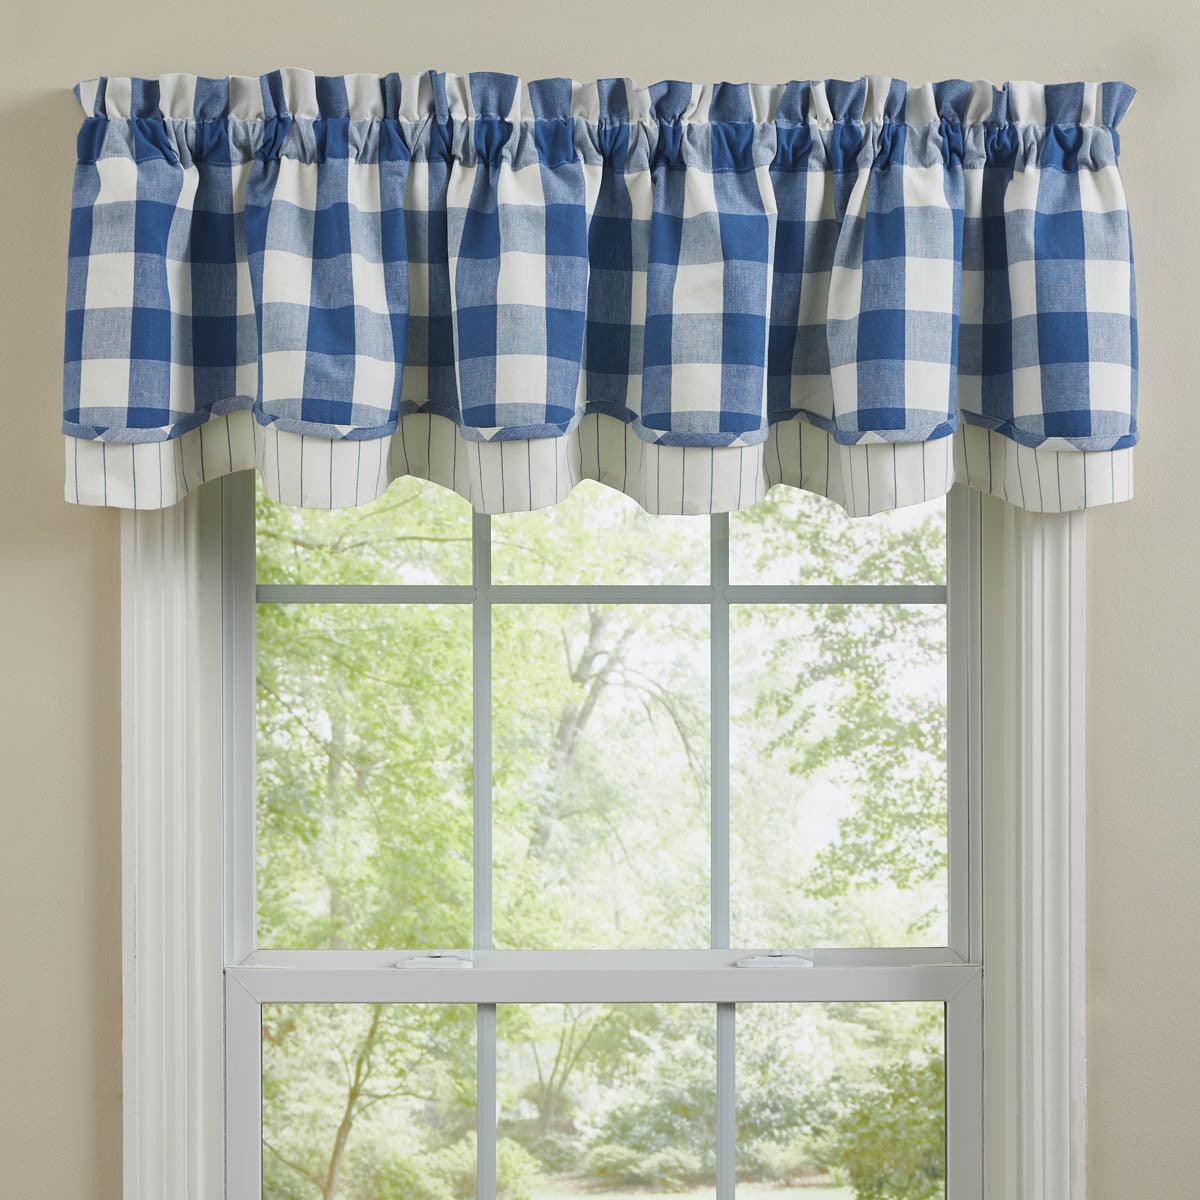 Wicklow Check Valance - Lined Layered China Blue Park Designs